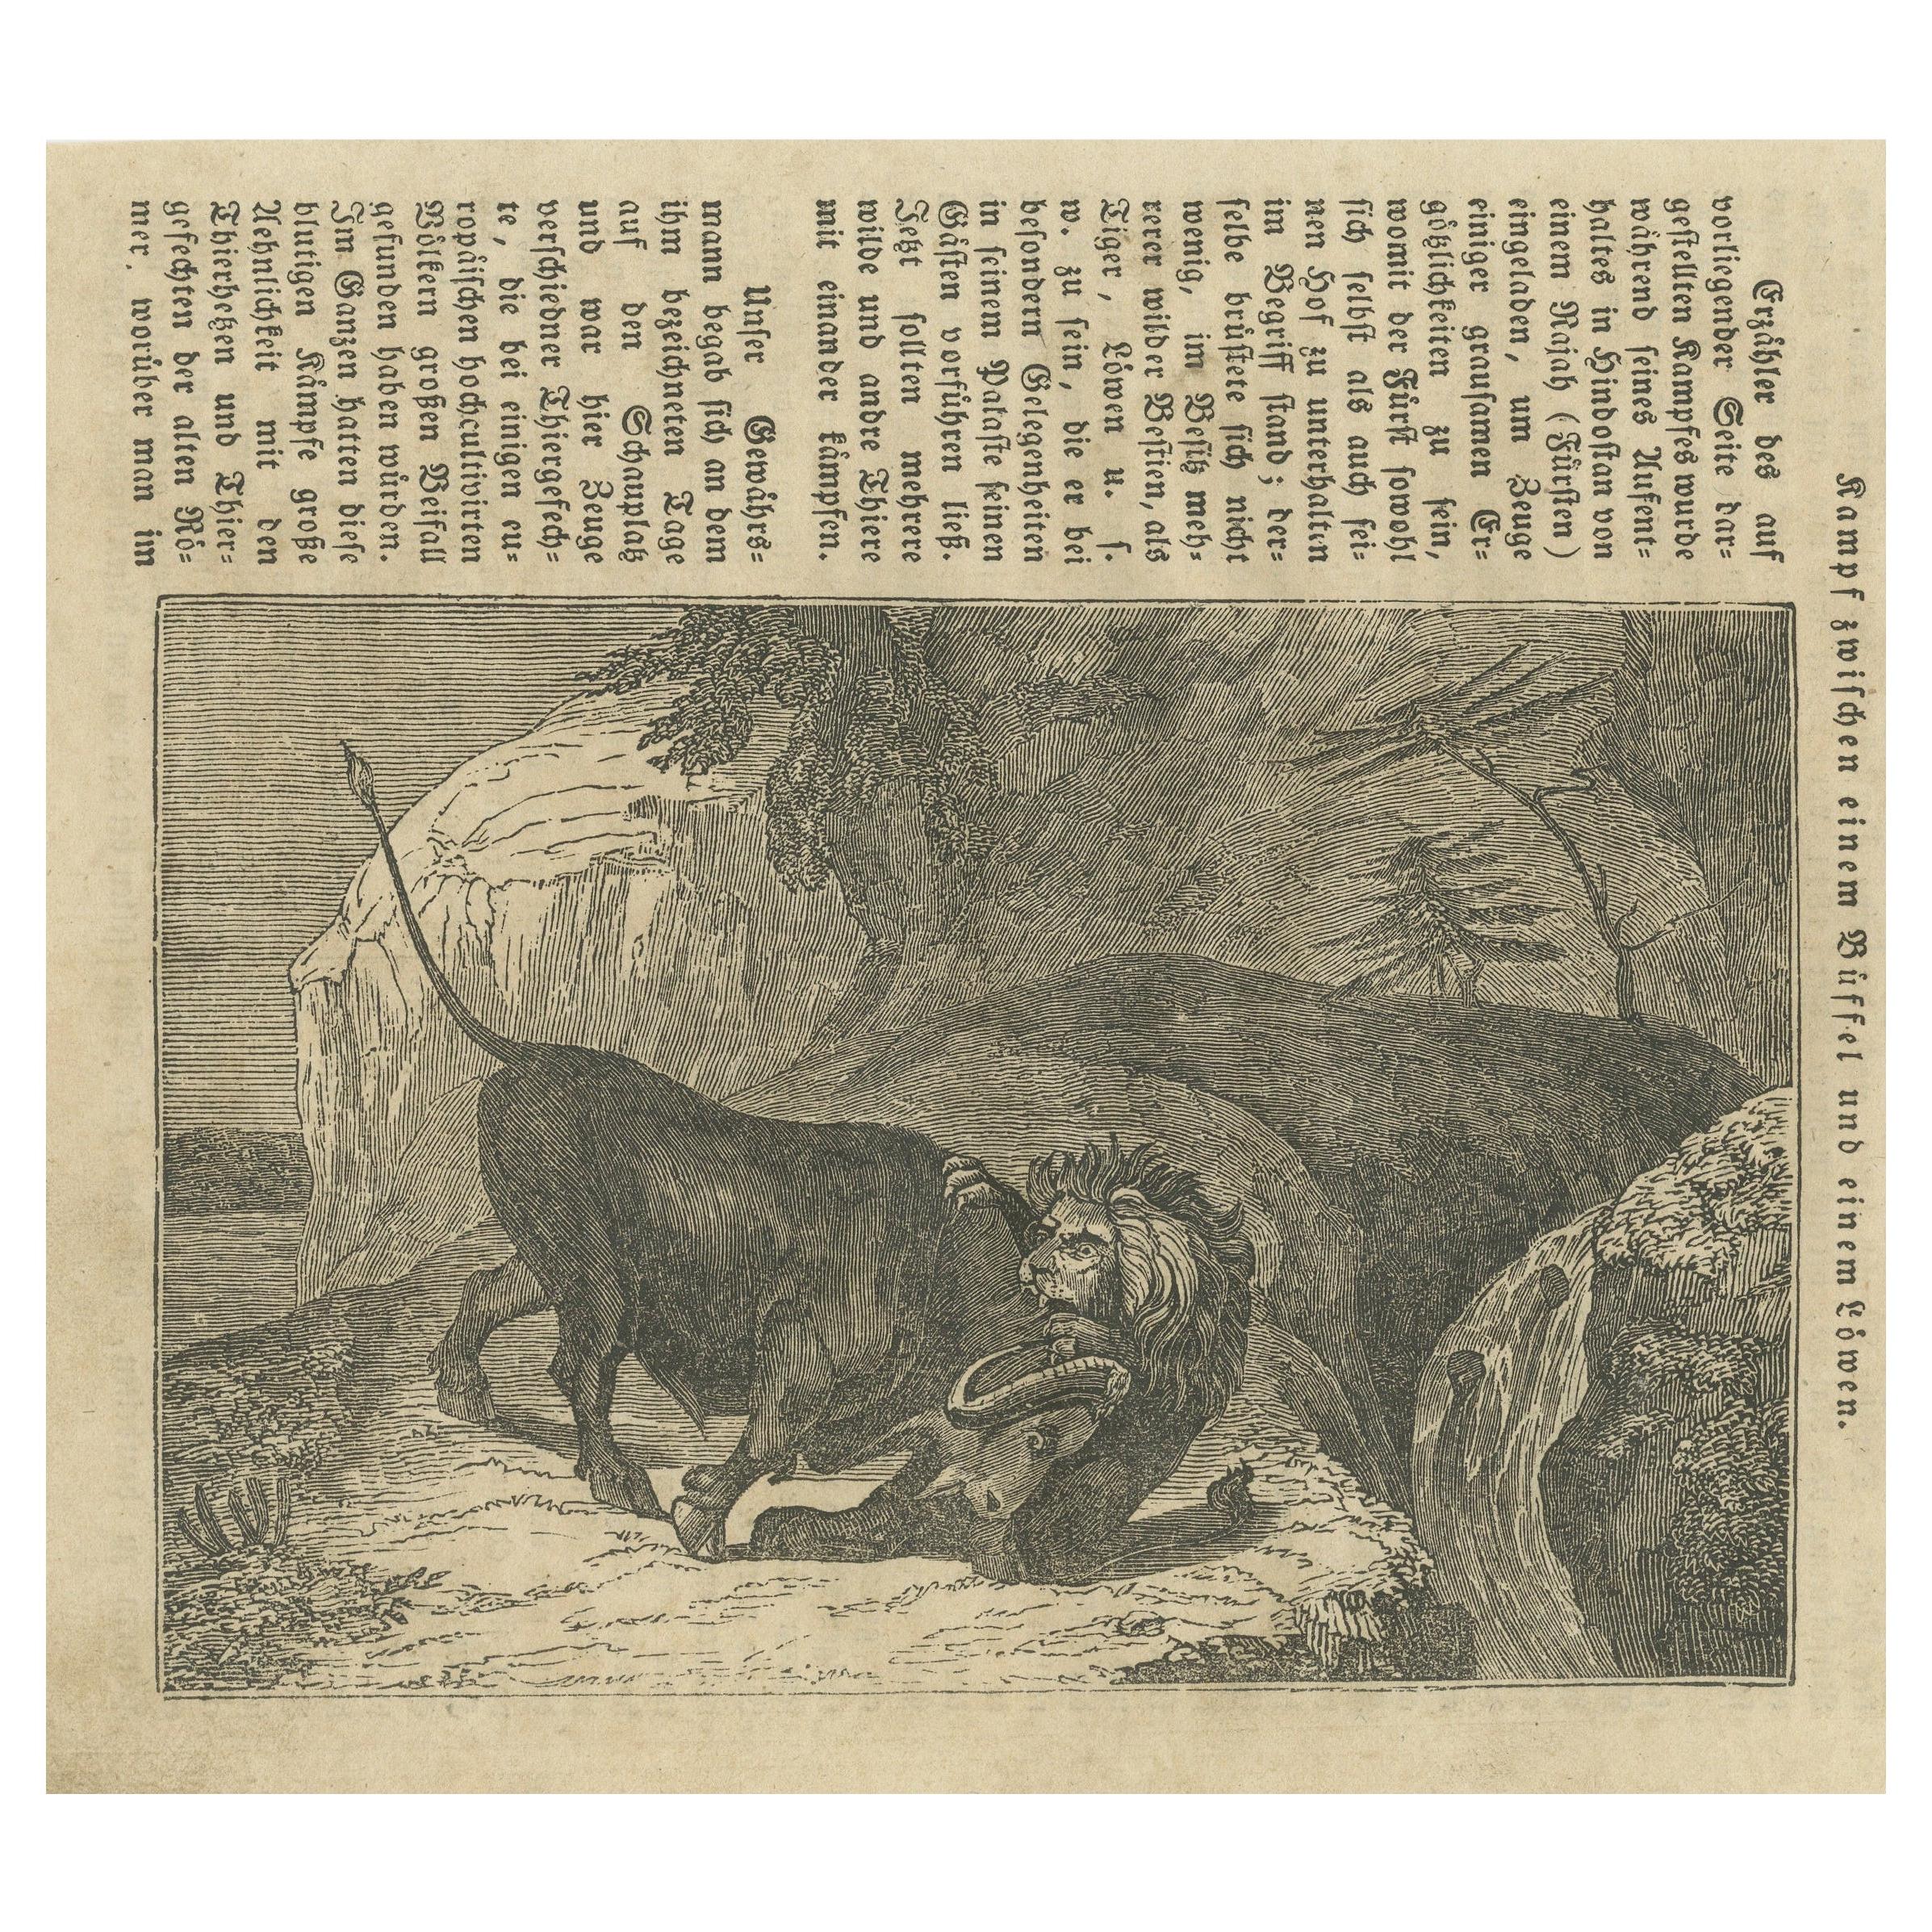 Original Antique German Print of Fight Between Buffalo and Lion